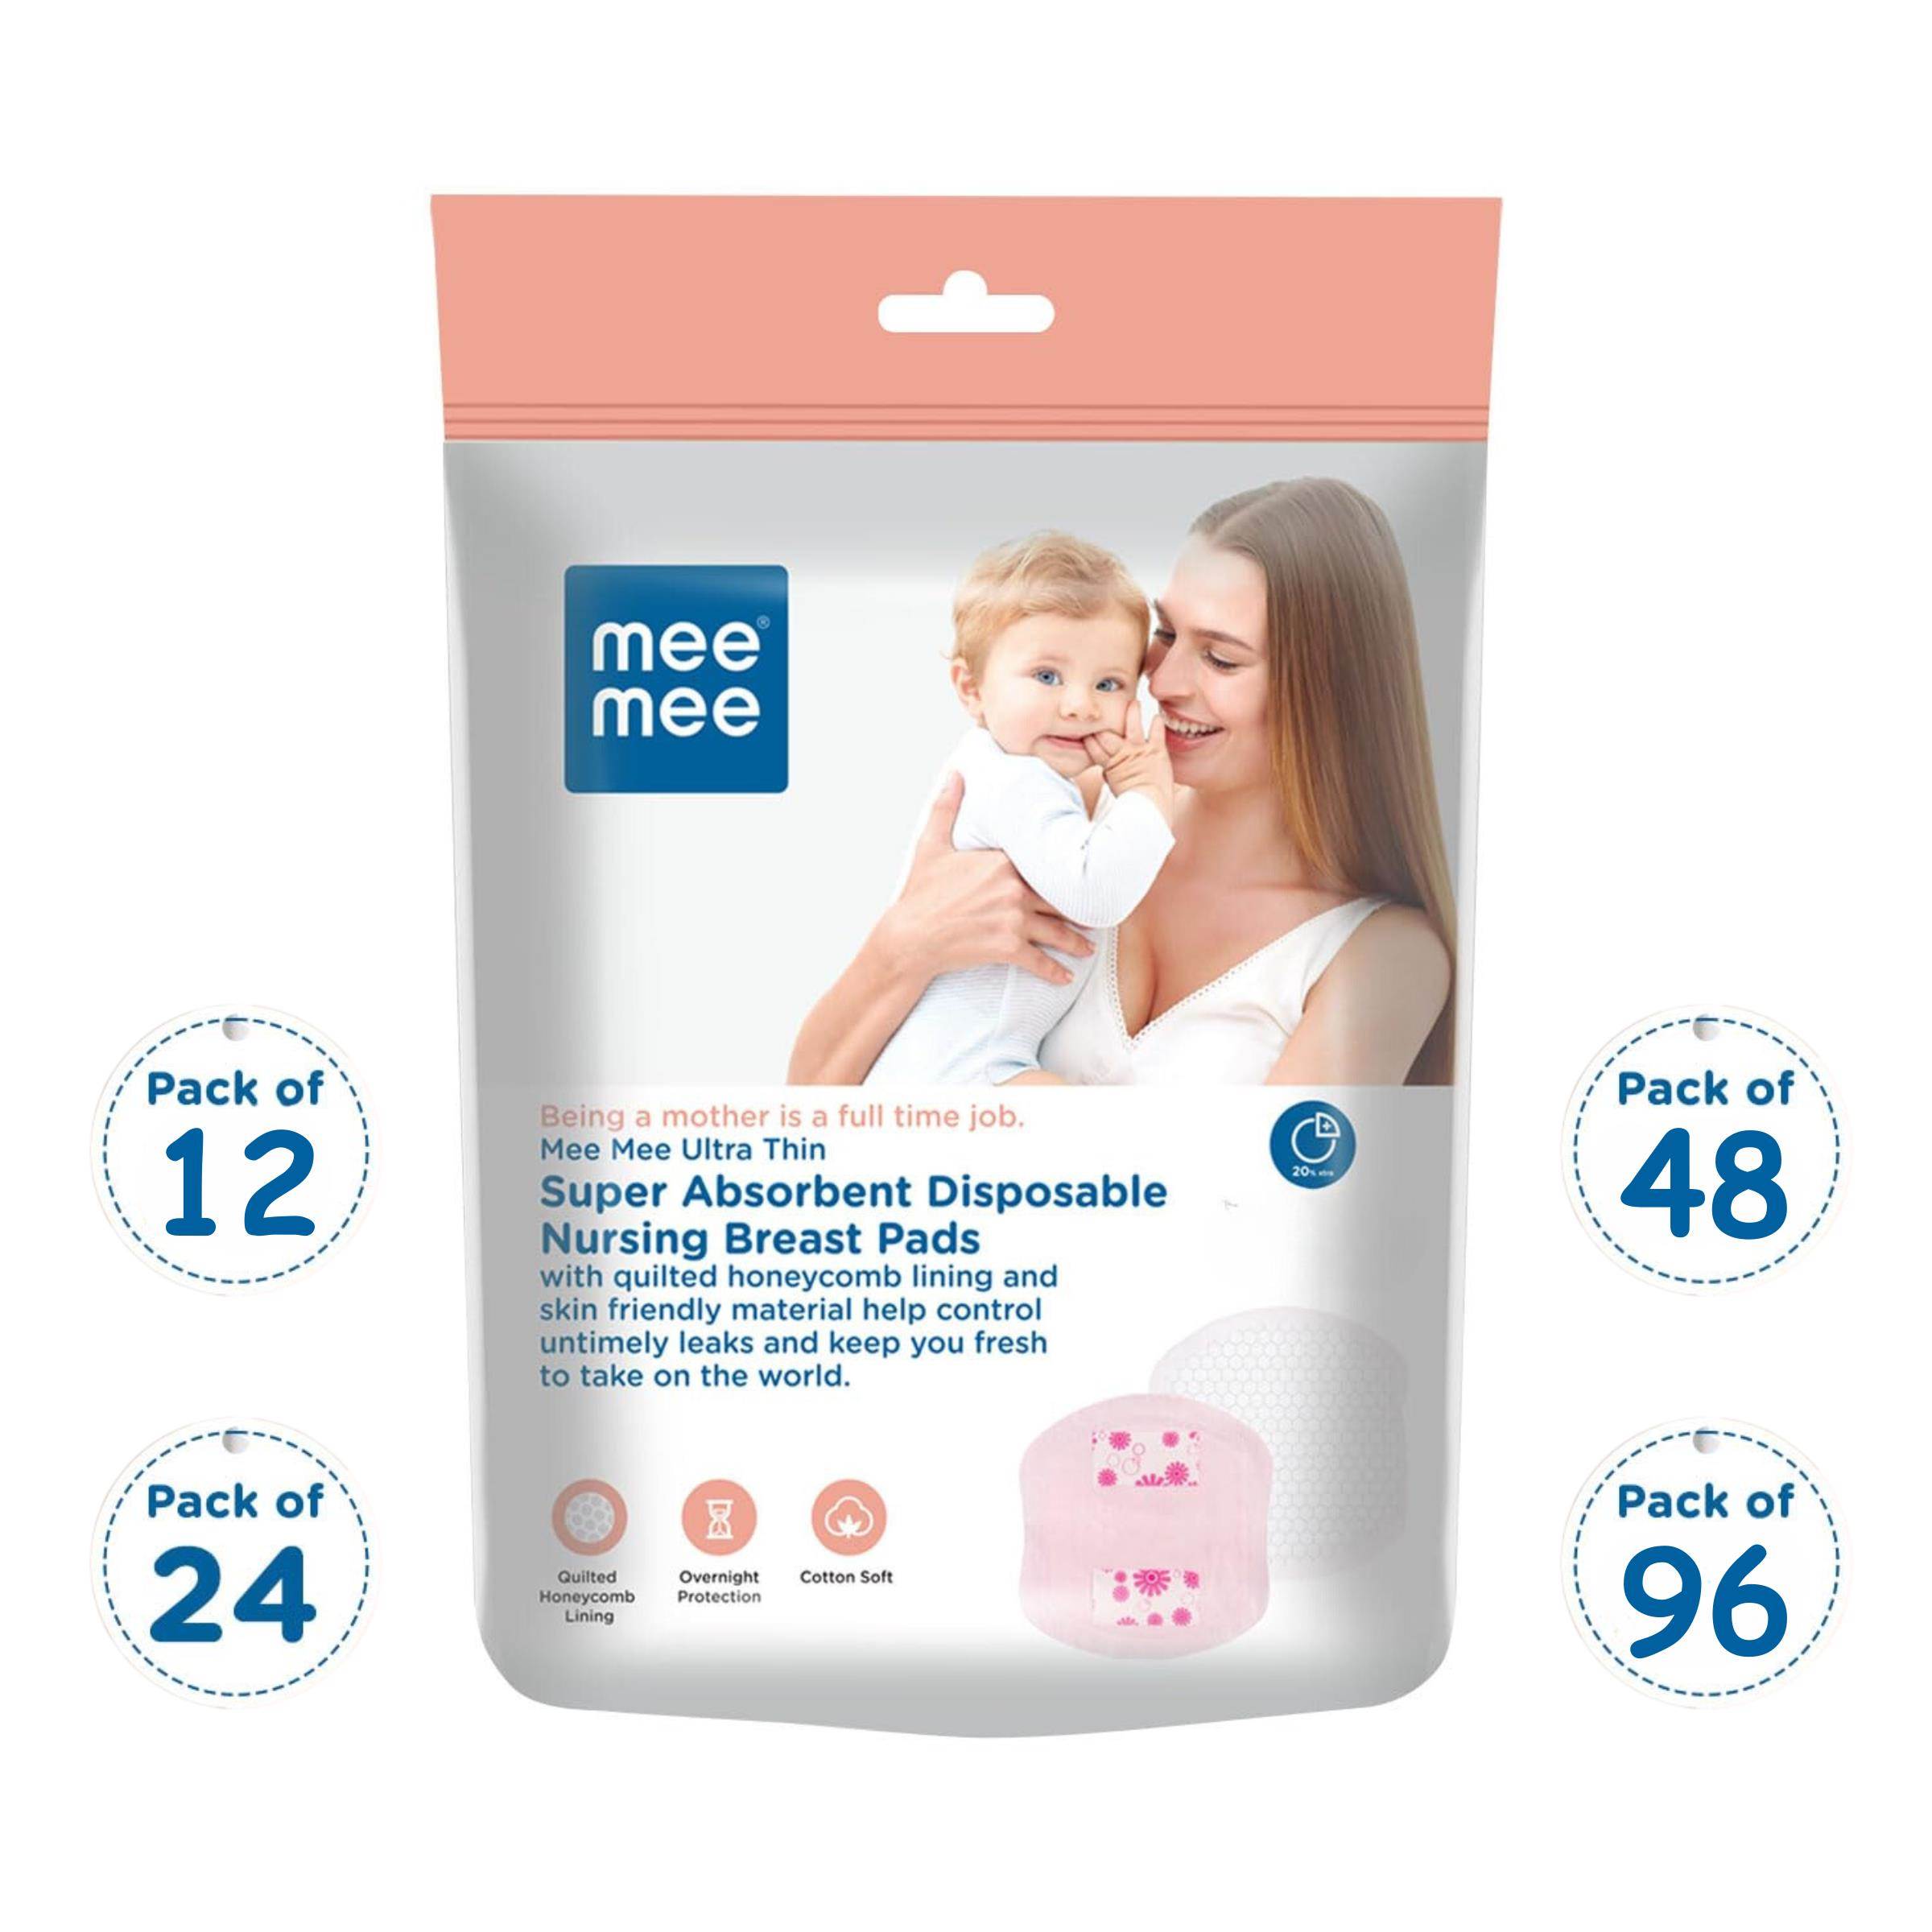 Mee Mee Ultra Thin Disposable Nursing Breast Pads :: SMILE BABY